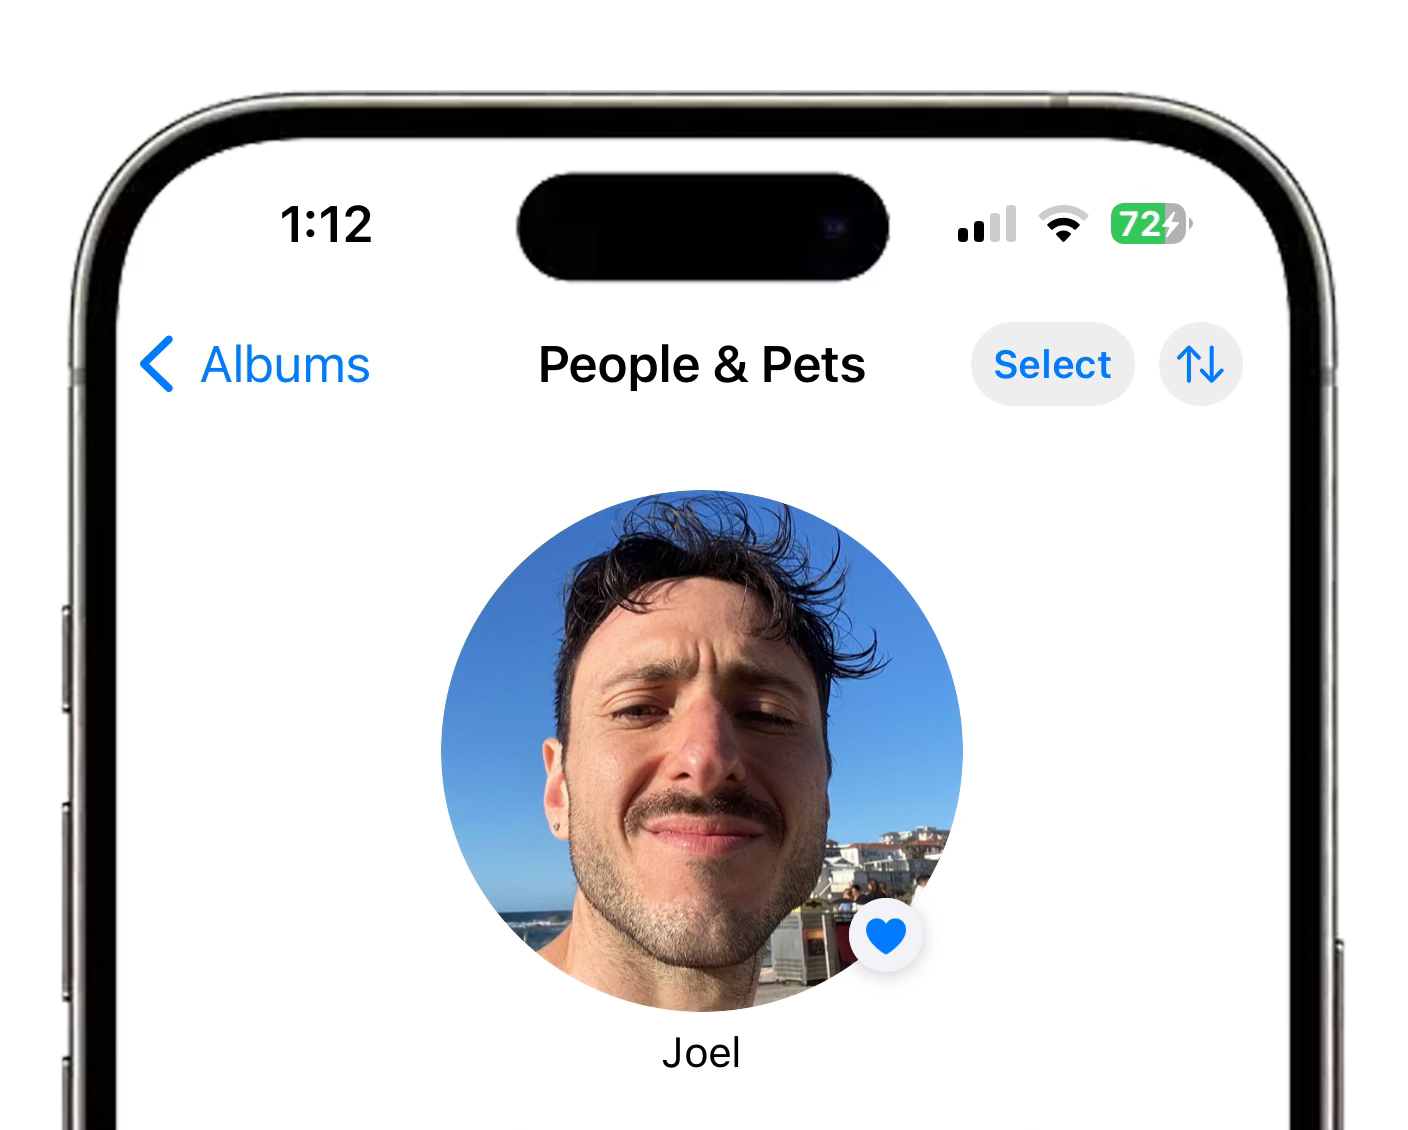 Screenshot of a smartphone interface showing a 'People & Pets' photo album. In the center is a highlighted circular thumbnail labeled 'Joel' featuring a smiling person with short brown hair and a slight stubble, against a clear blue sky backdrop.